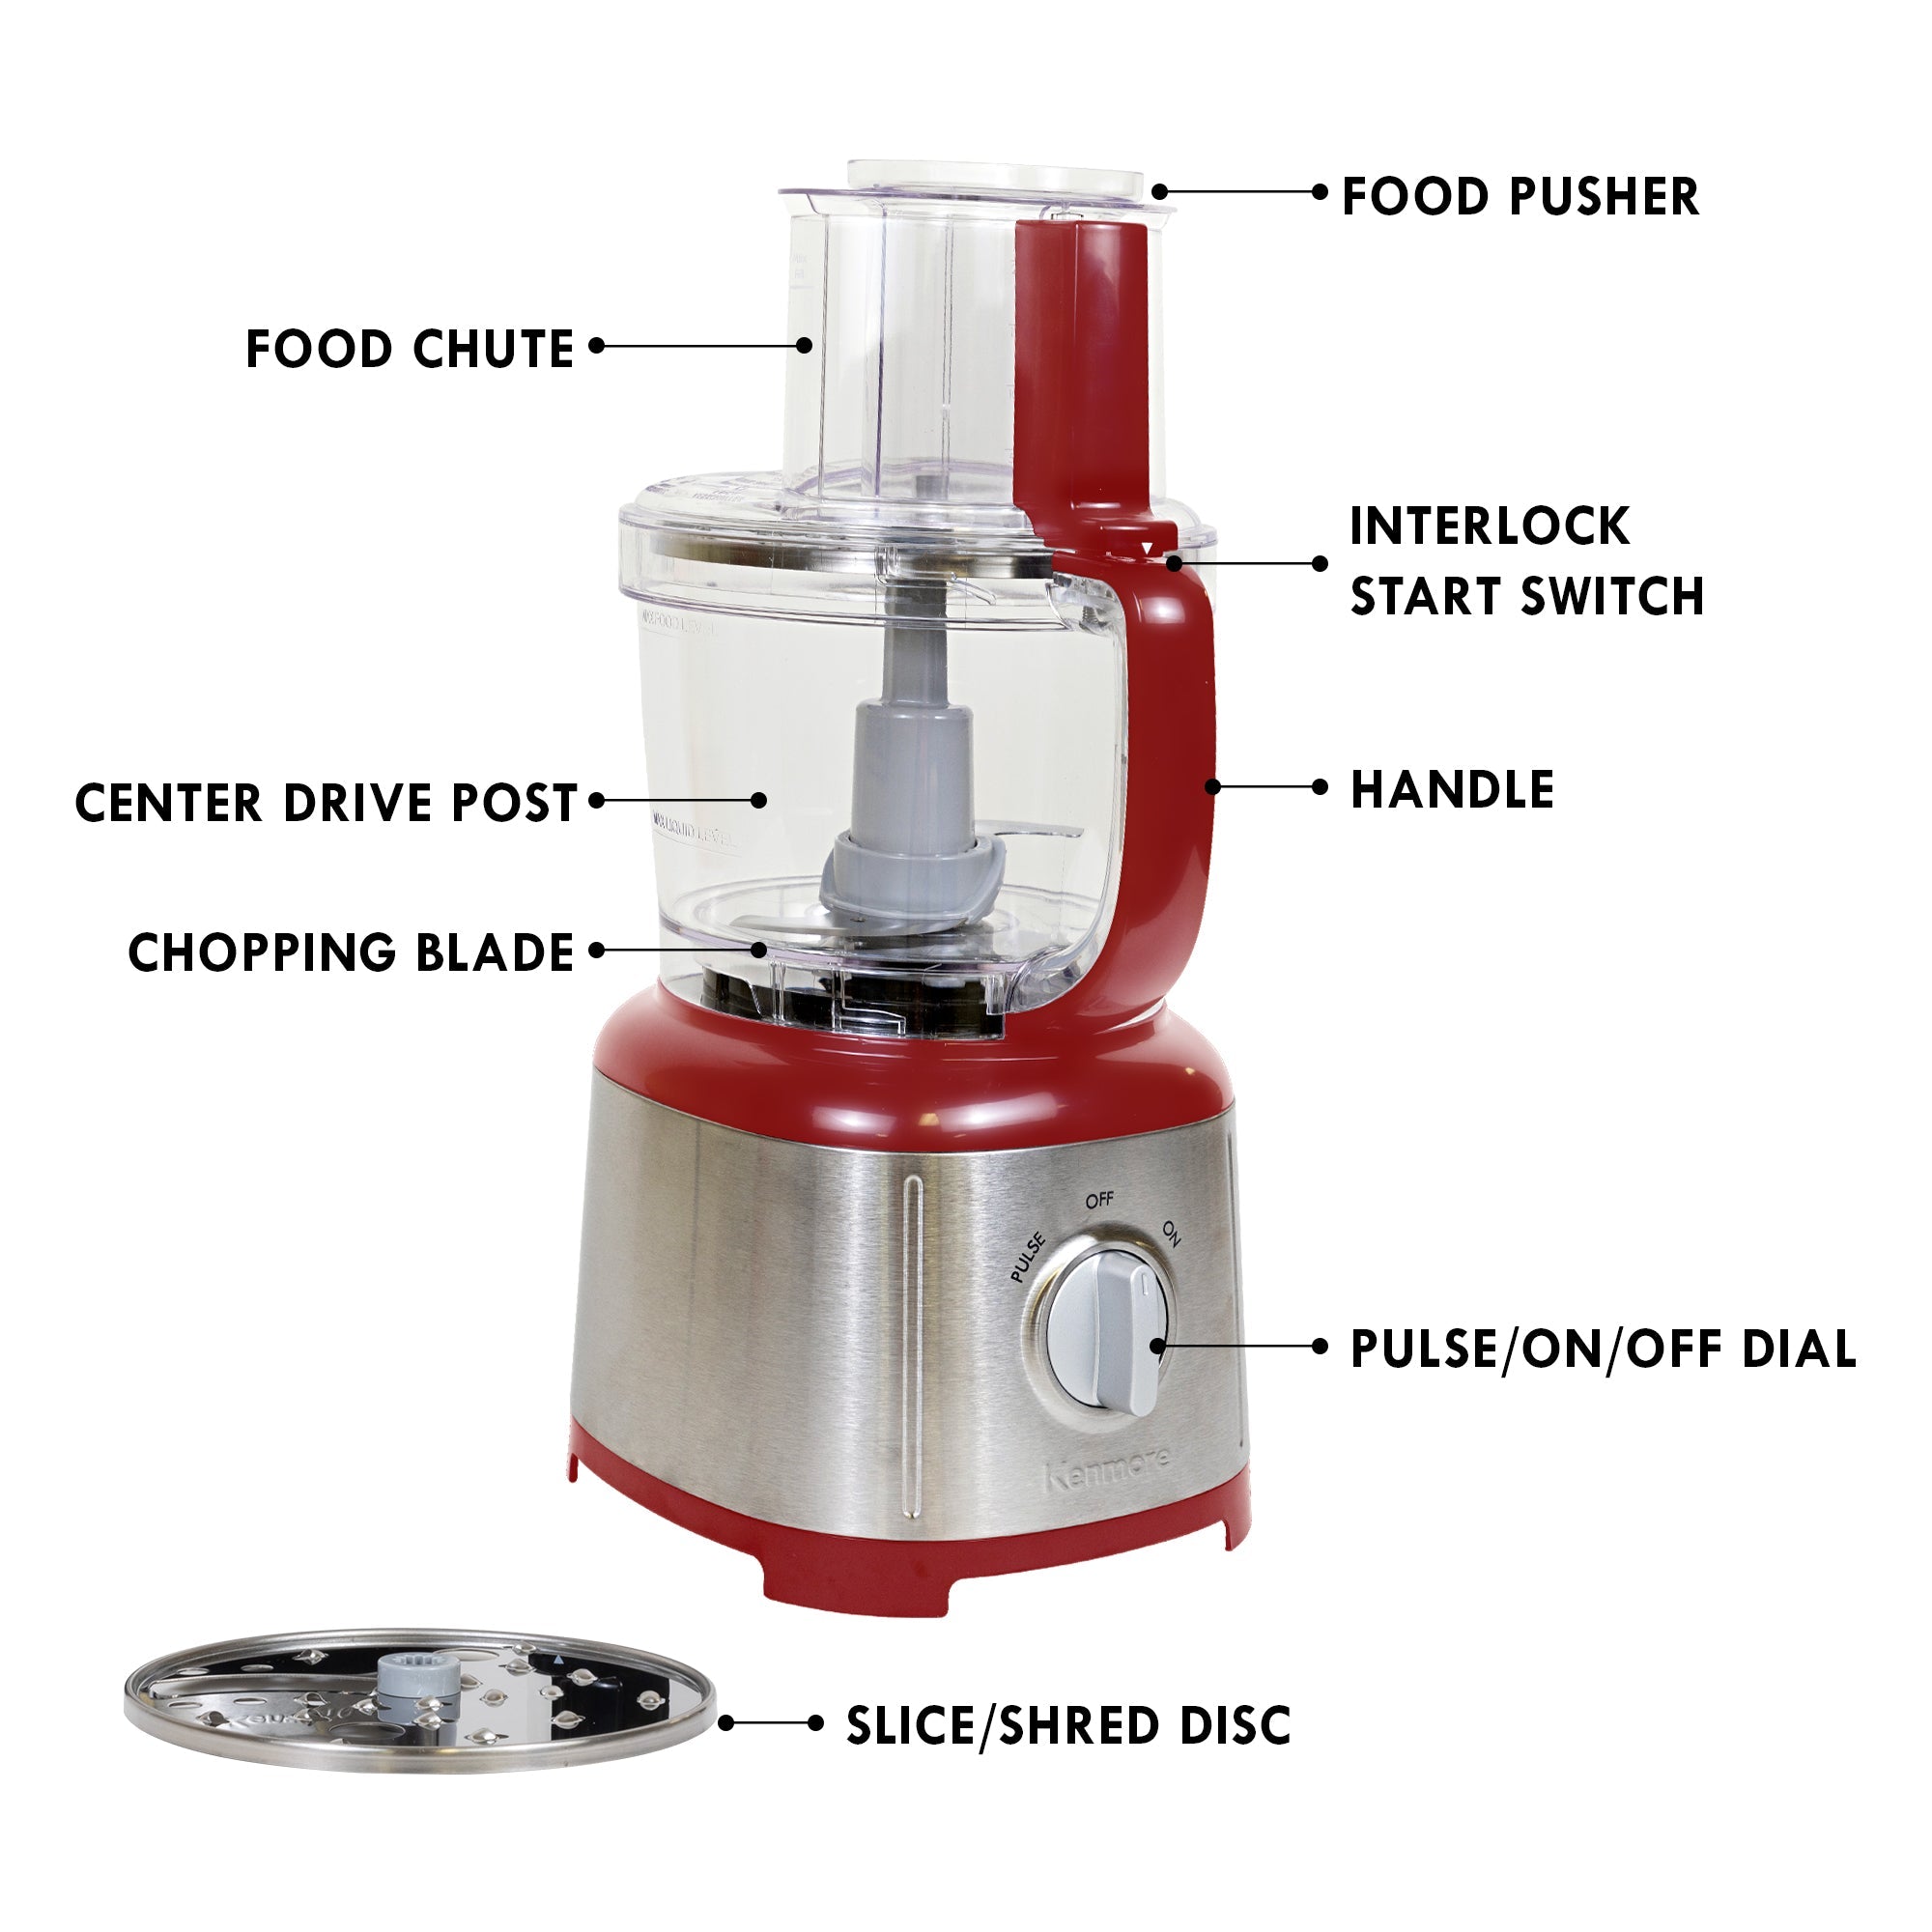 Kenmore 11 cup food processor and vegetable chopper with parts and accessories labeled: Food pusher; food chute; interlock start switch; handle; center drive post; chopping blade; pulse/on/off dial; slice/shred disc